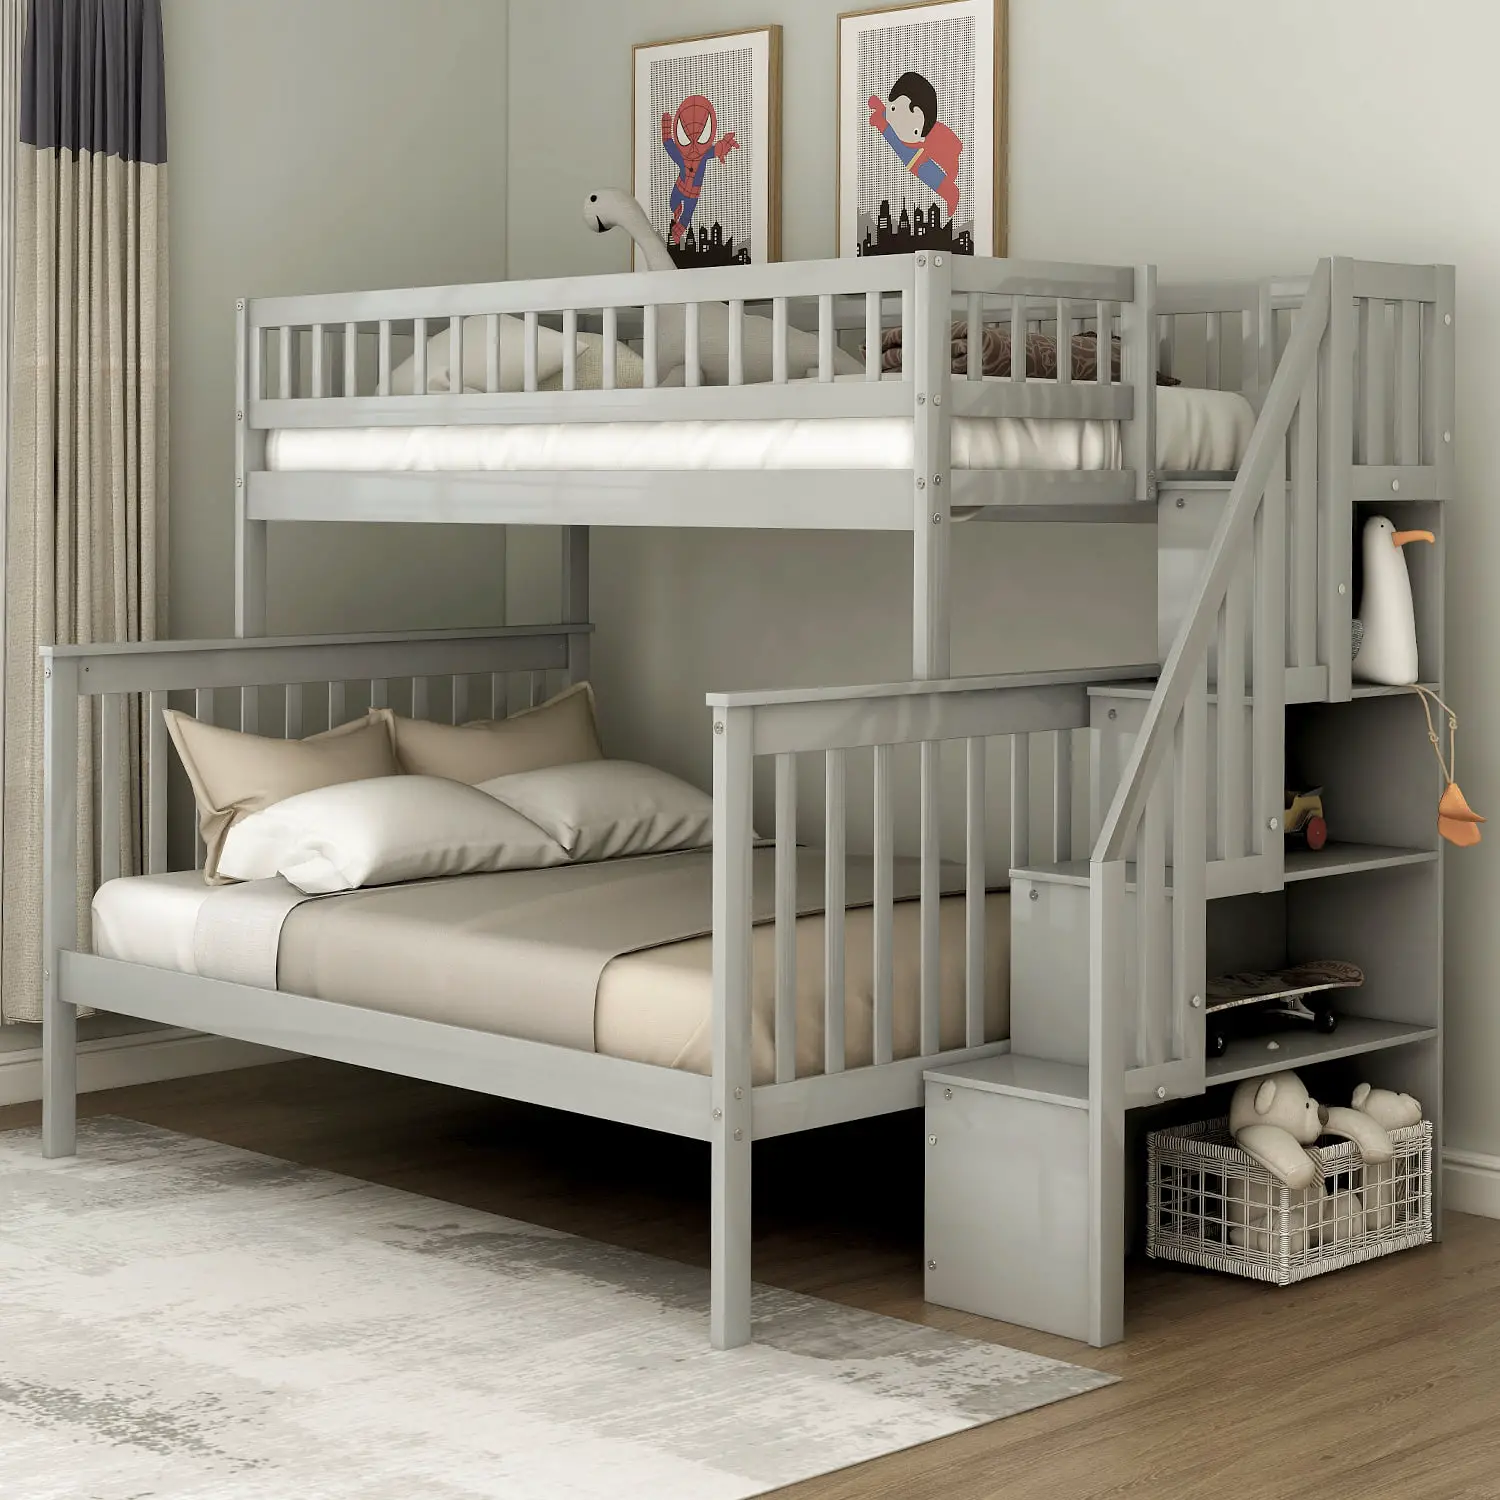 Harper& Bright Designs Twin Over Full Bunk Bed with Stairs and Storage ...